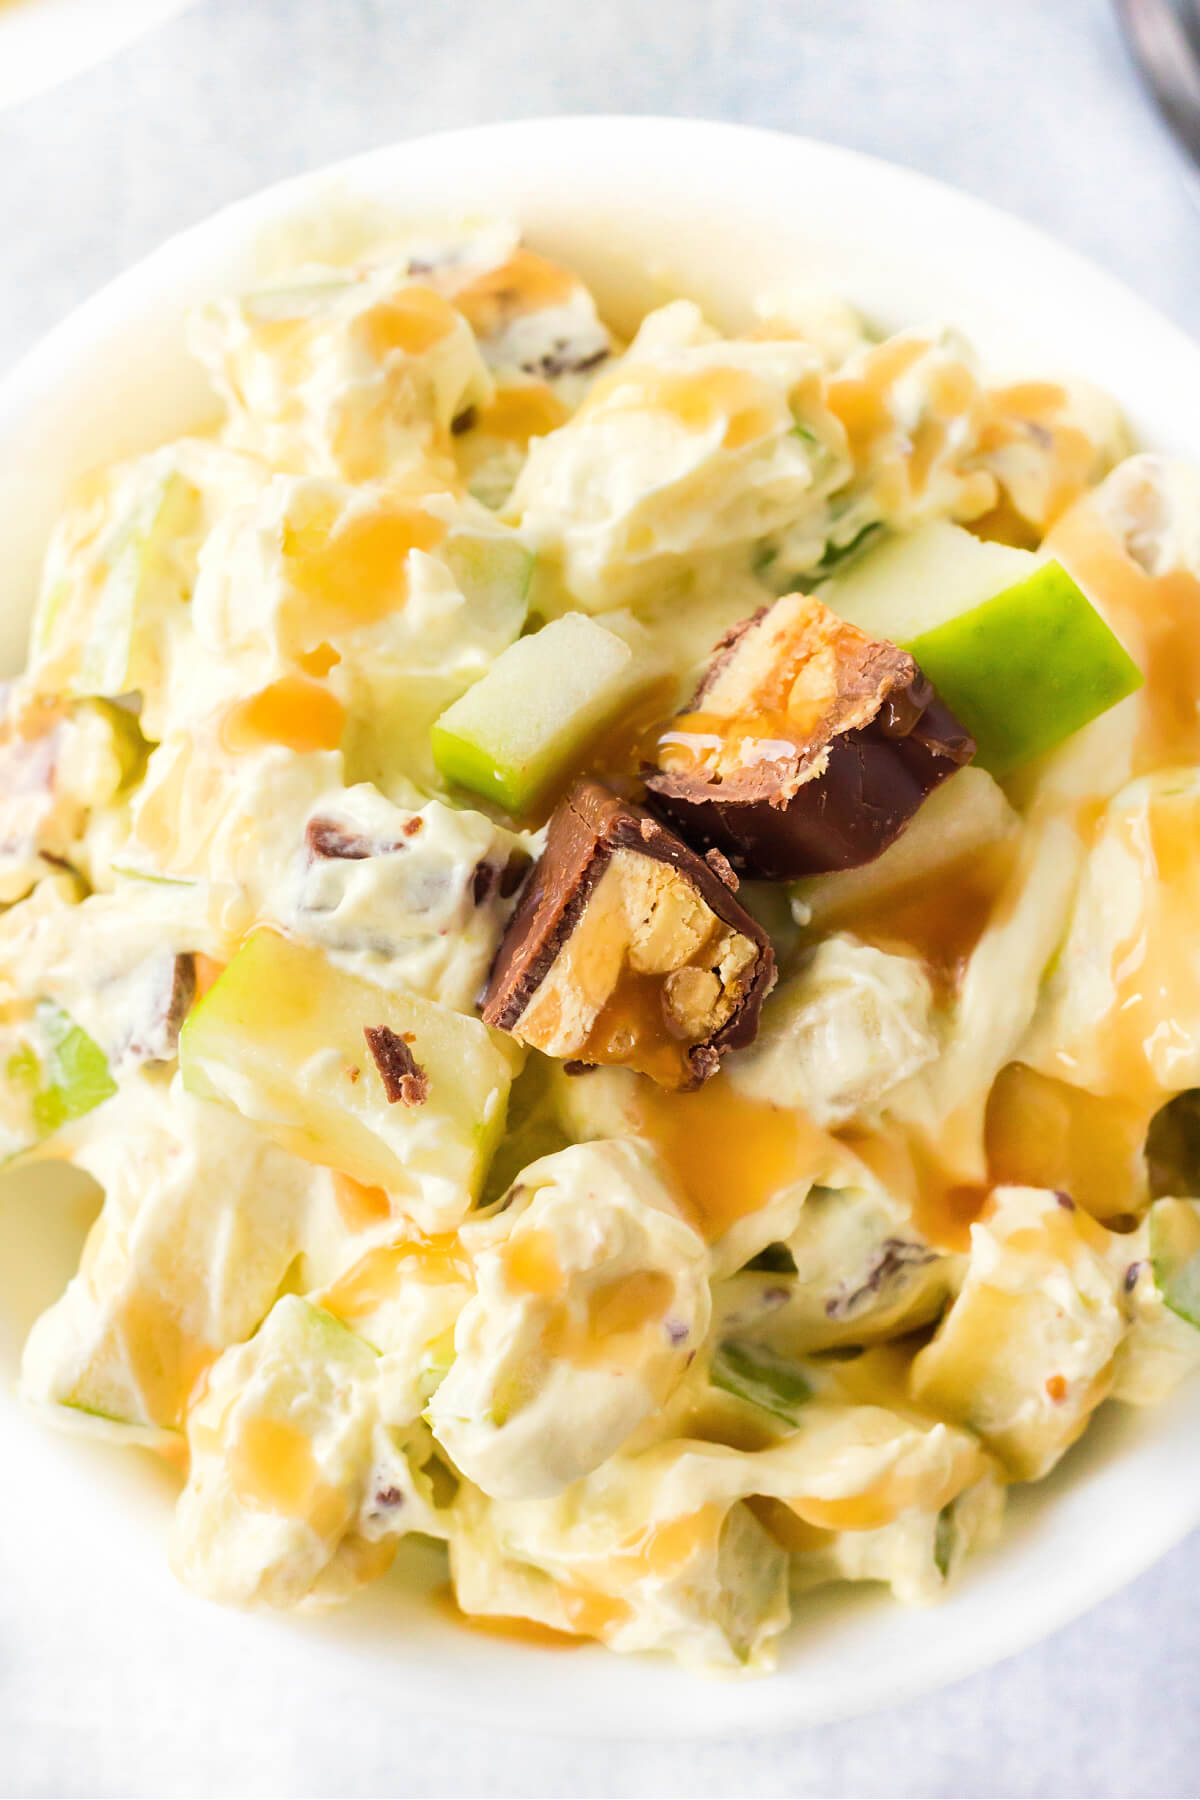 Snickers Caramel Apple Salad Recipe - The Gracious Wife